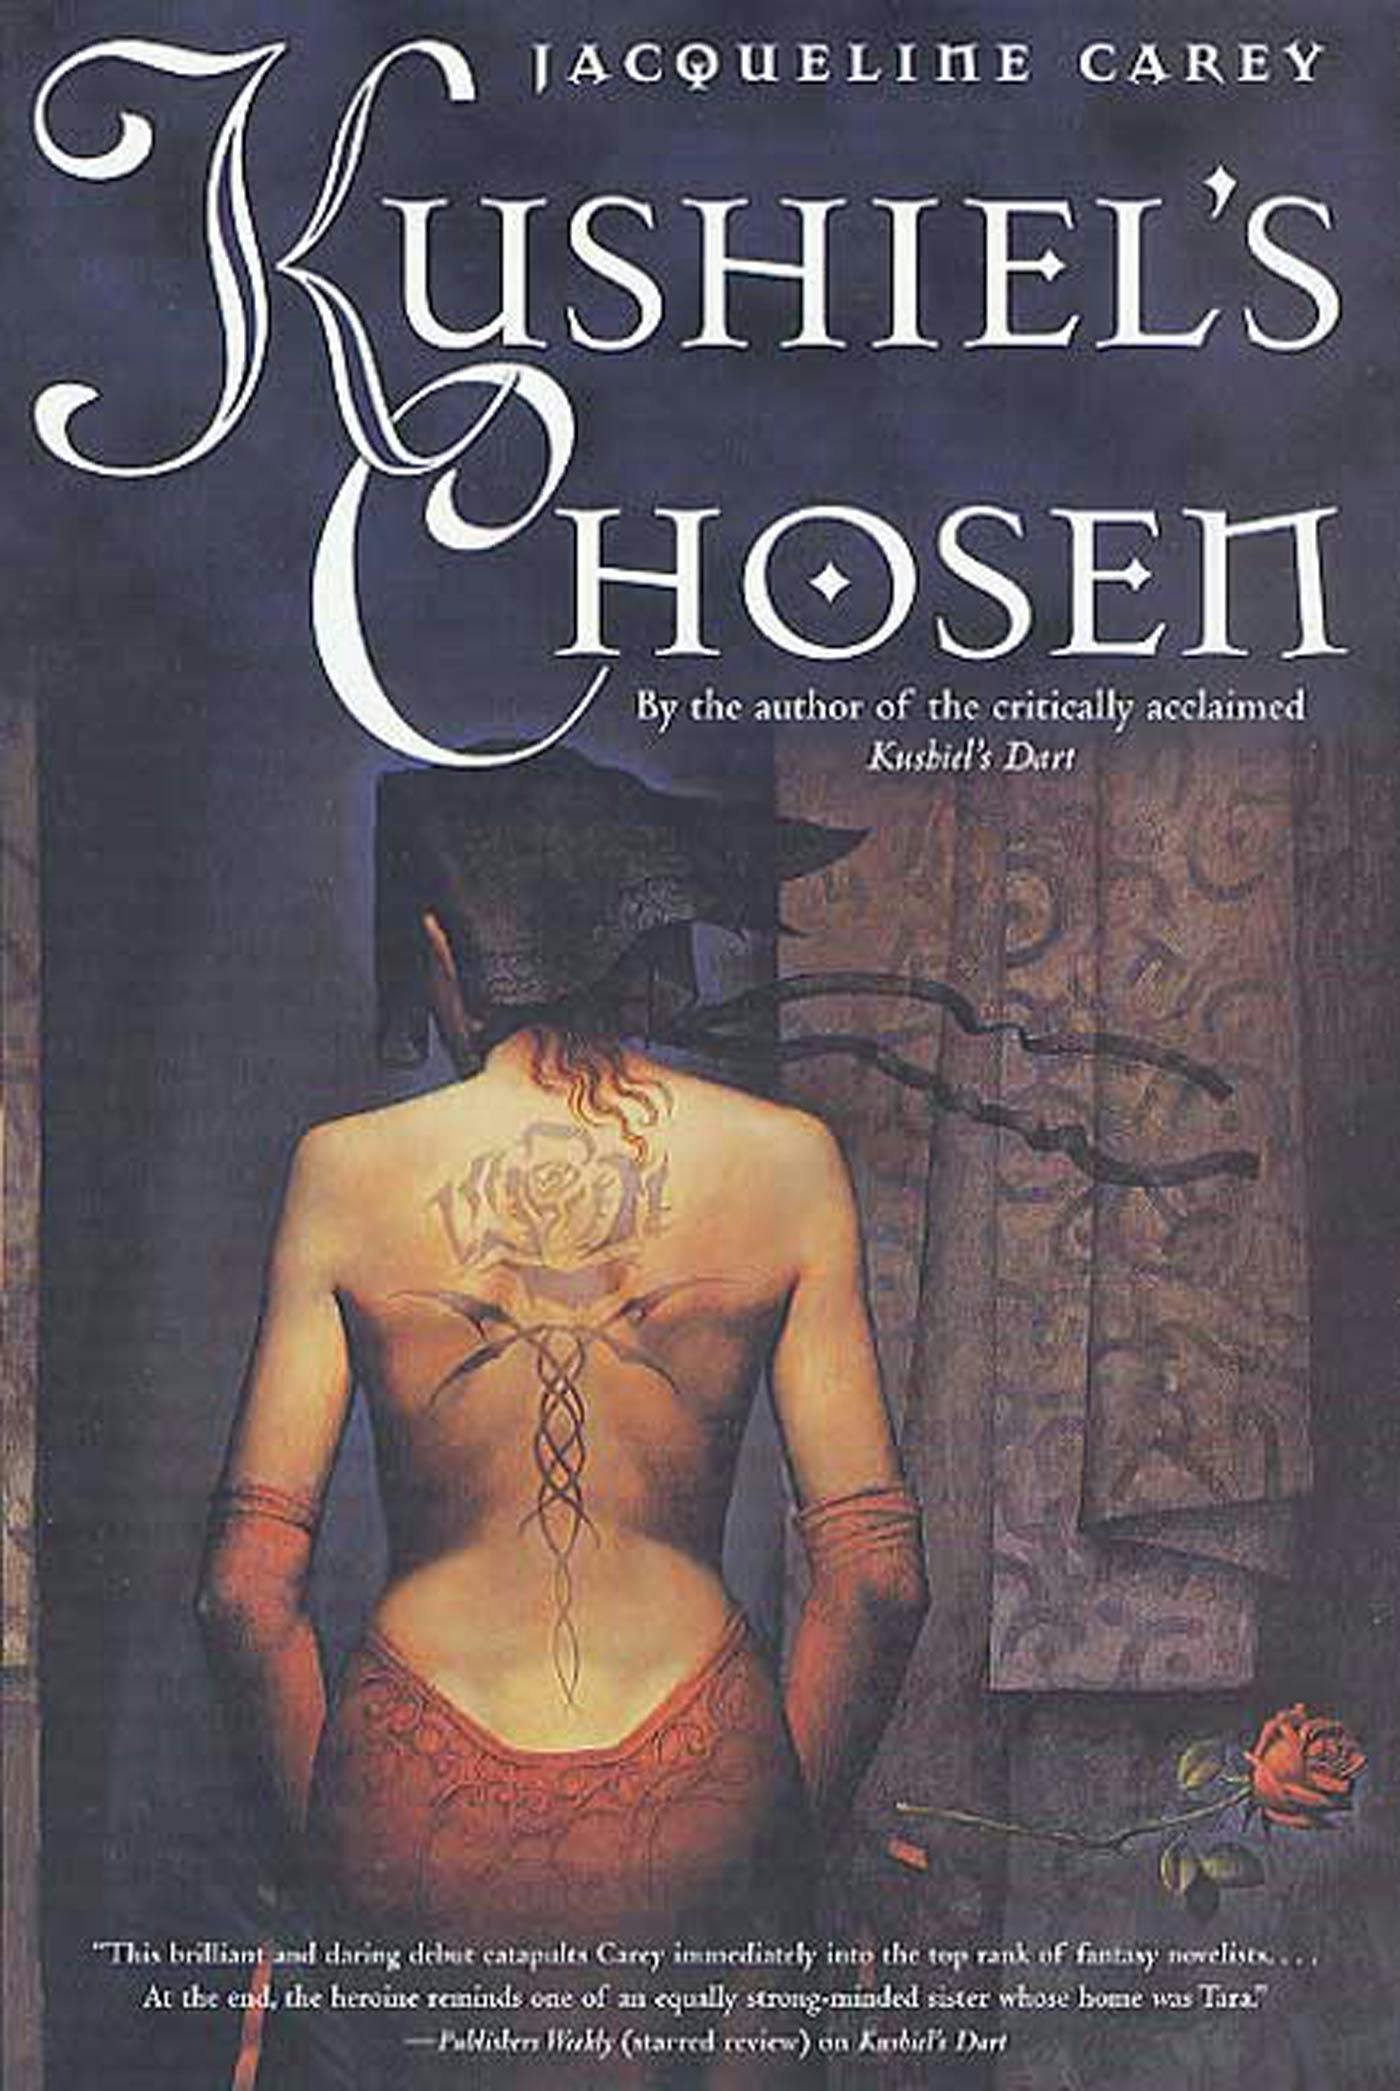 Cover for the book titled as: Kushiel's Chosen